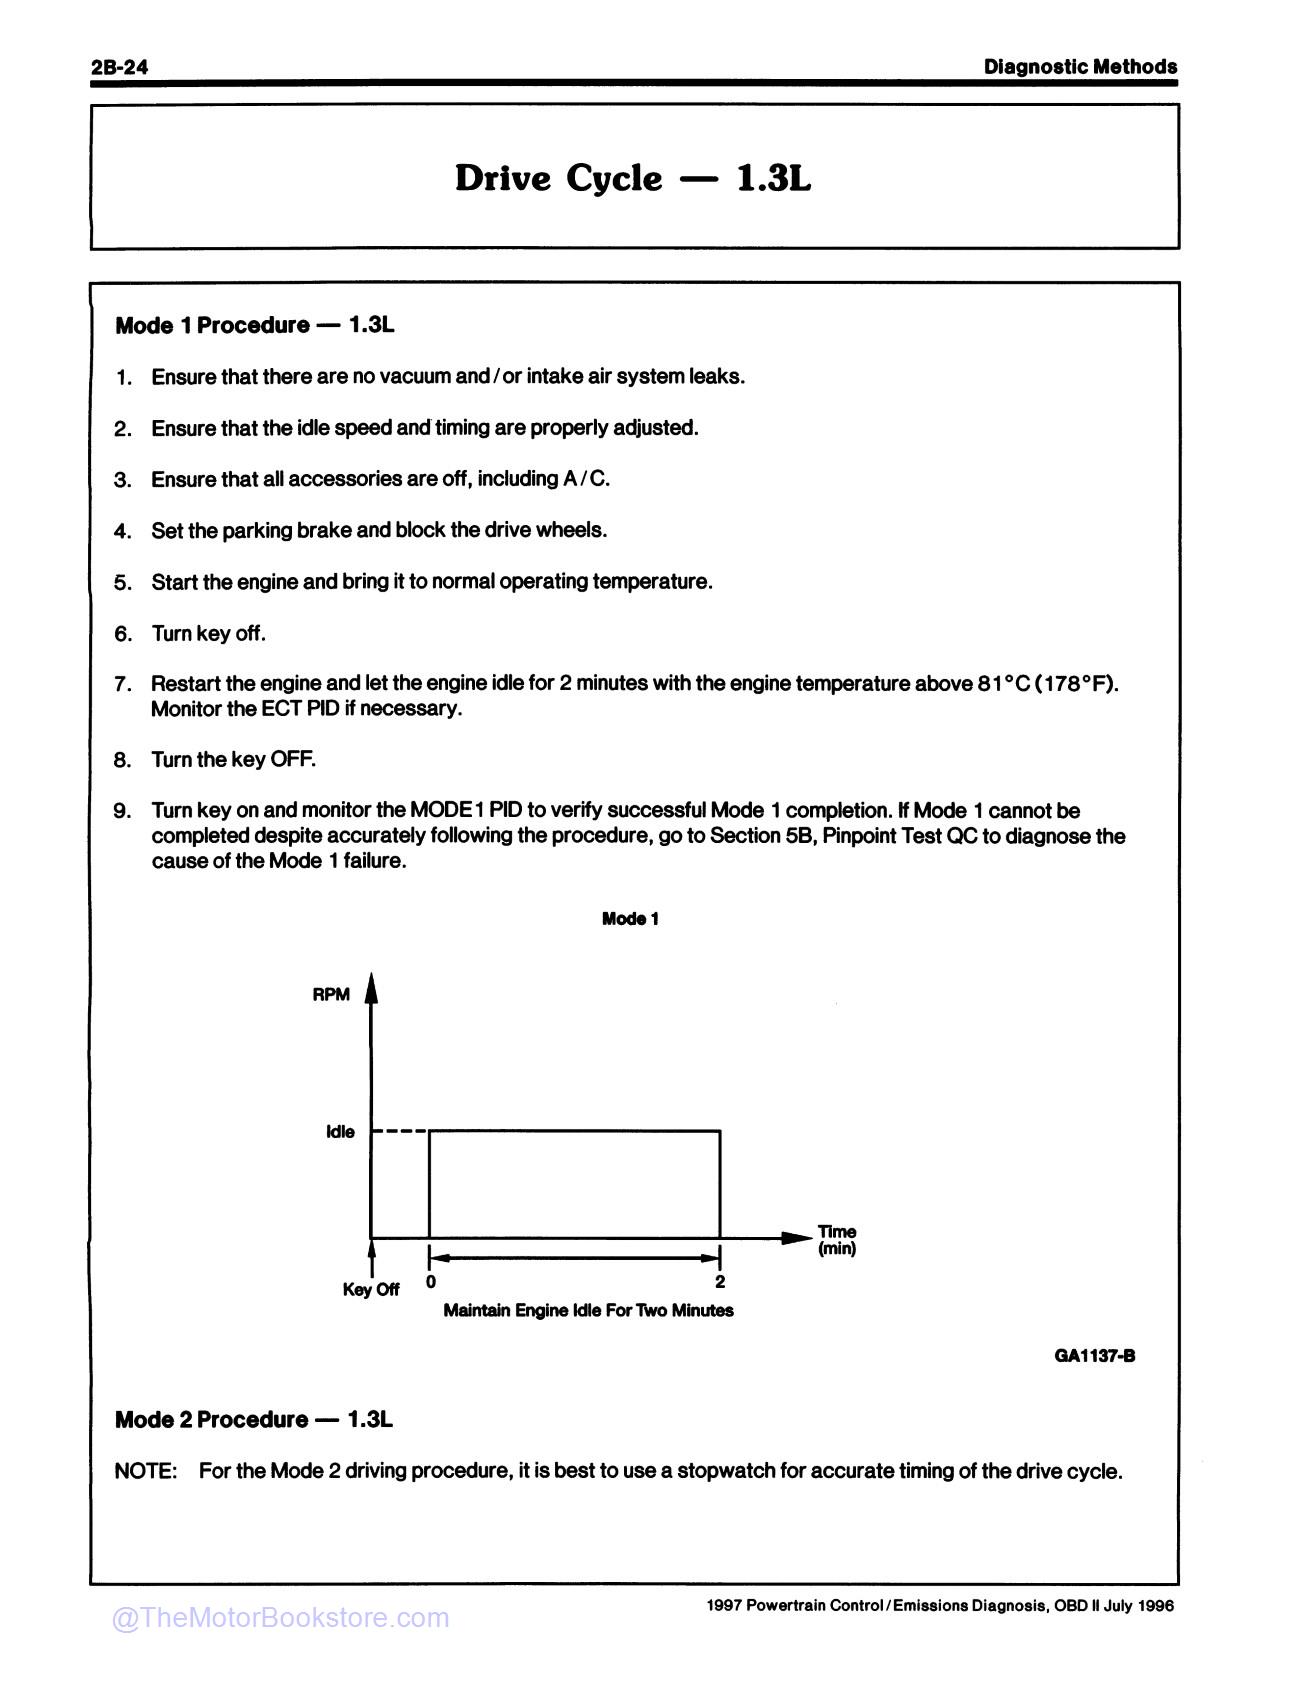 1997 Ford Powertrain Control Emissions Diagnosis Service Manual - Sample Page 1